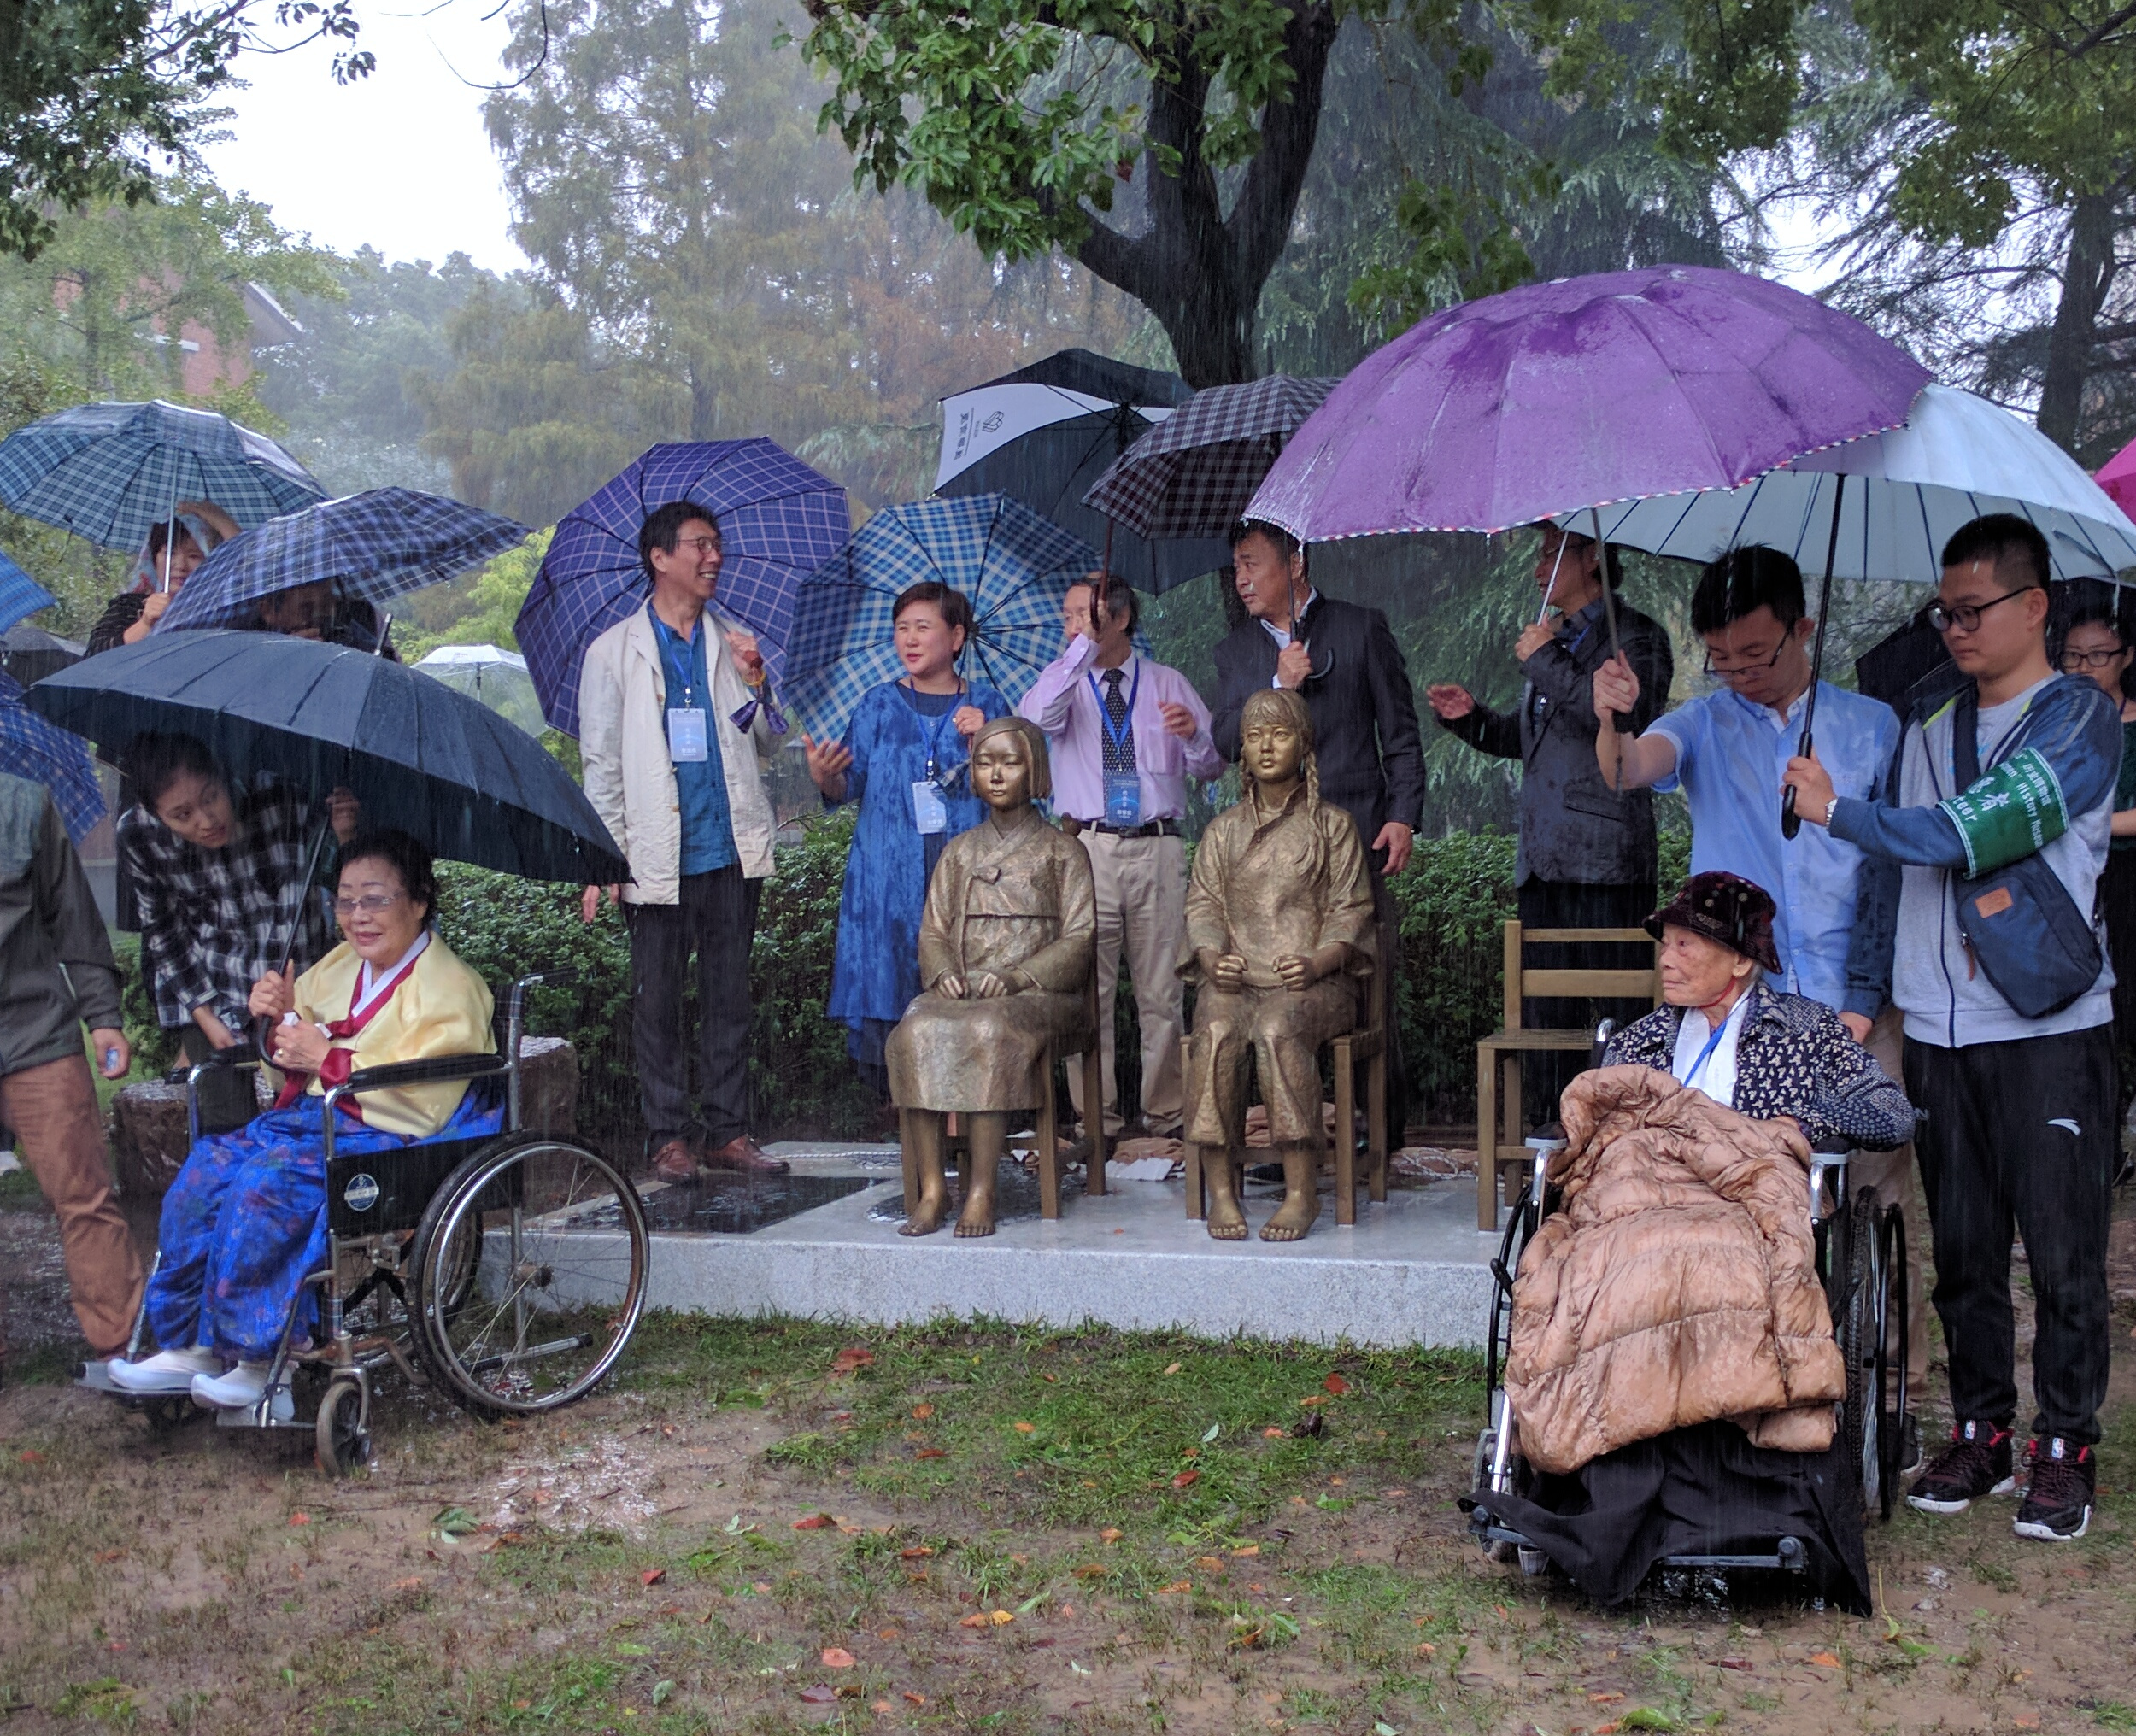 First Comfort Women Memorial unveiled at Shanghai Normal University on October 22, 2016